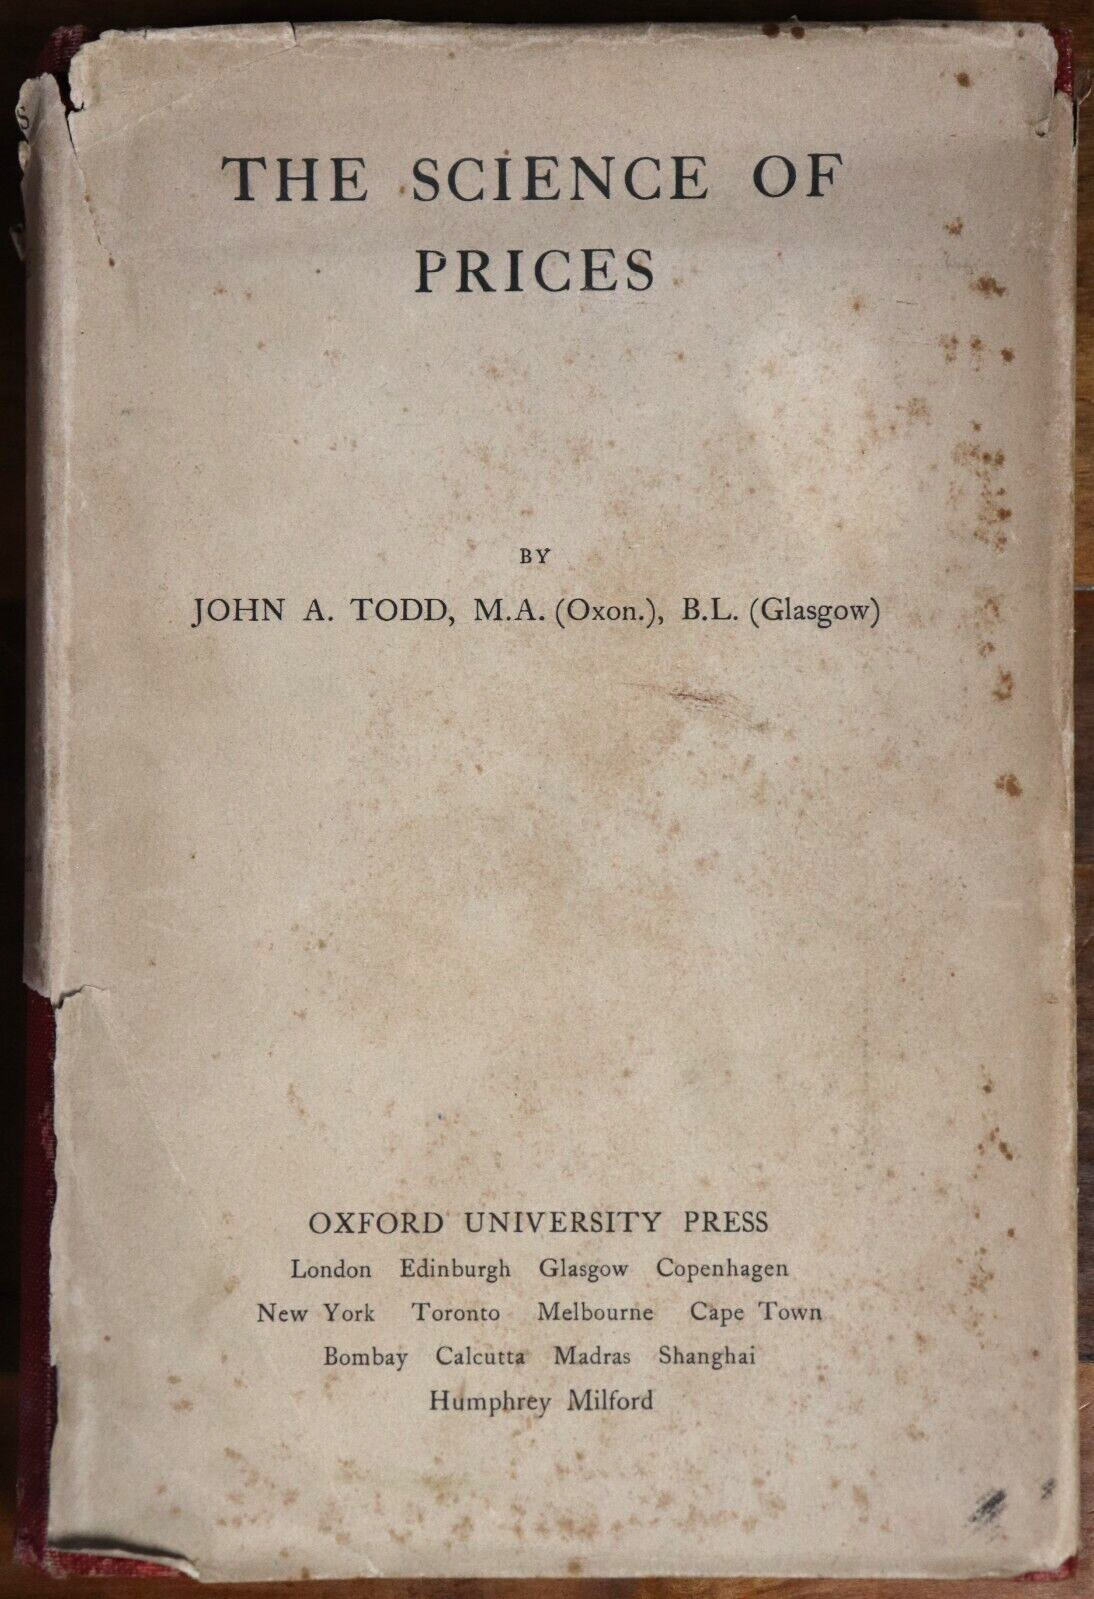 The Science Of Prices by John A. Todd - 1925 - 1st Edition Economics Book - 0